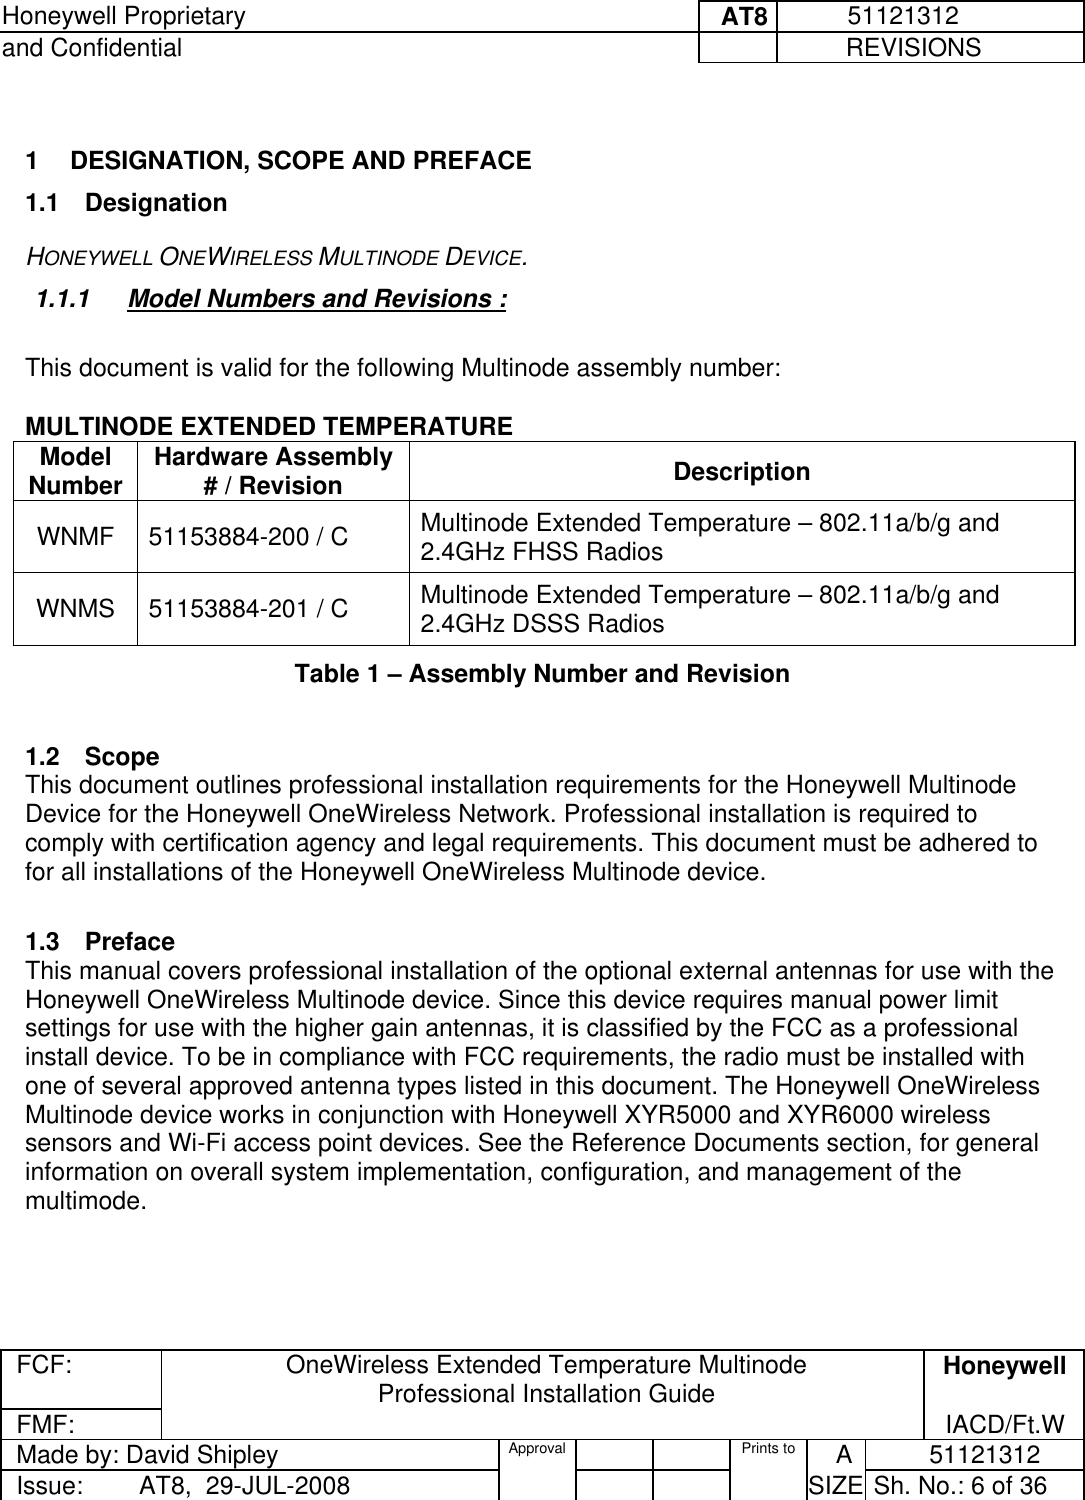 Honeywell Proprietary     AT8           51121312 and Confidential             REVISIONS  FCF: OneWireless Extended Temperature Multinode  Professional Installation Guide  Honeywell FMF:               IACD/Ft.W Made by: David Shipley  Approval   Prints to     A           51121312 Issue:        AT8,  29-JUL-2008          SIZE  Sh. No.: 6 of 36   1  DESIGNATION, SCOPE AND PREFACE 1.1 Designation HONEYWELL ONEWIRELESS MULTINODE DEVICE.  1.1.1  Model Numbers and Revisions :   This document is valid for the following Multinode assembly number:    MULTINODE EXTENDED TEMPERATURE Model Number  Hardware Assembly # / Revision  Description WNMF  51153884-200 / C  Multinode Extended Temperature – 802.11a/b/g and 2.4GHz FHSS Radios WNMS  51153884-201 / C  Multinode Extended Temperature – 802.11a/b/g and 2.4GHz DSSS Radios Table 1 – Assembly Number and Revision   1.2 Scope This document outlines professional installation requirements for the Honeywell Multinode Device for the Honeywell OneWireless Network. Professional installation is required to comply with certification agency and legal requirements. This document must be adhered to for all installations of the Honeywell OneWireless Multinode device.   1.3 Preface This manual covers professional installation of the optional external antennas for use with the Honeywell OneWireless Multinode device. Since this device requires manual power limit settings for use with the higher gain antennas, it is classified by the FCC as a professional install device. To be in compliance with FCC requirements, the radio must be installed with one of several approved antenna types listed in this document. The Honeywell OneWireless Multinode device works in conjunction with Honeywell XYR5000 and XYR6000 wireless sensors and Wi-Fi access point devices. See the Reference Documents section, for general information on overall system implementation, configuration, and management of the multimode.   